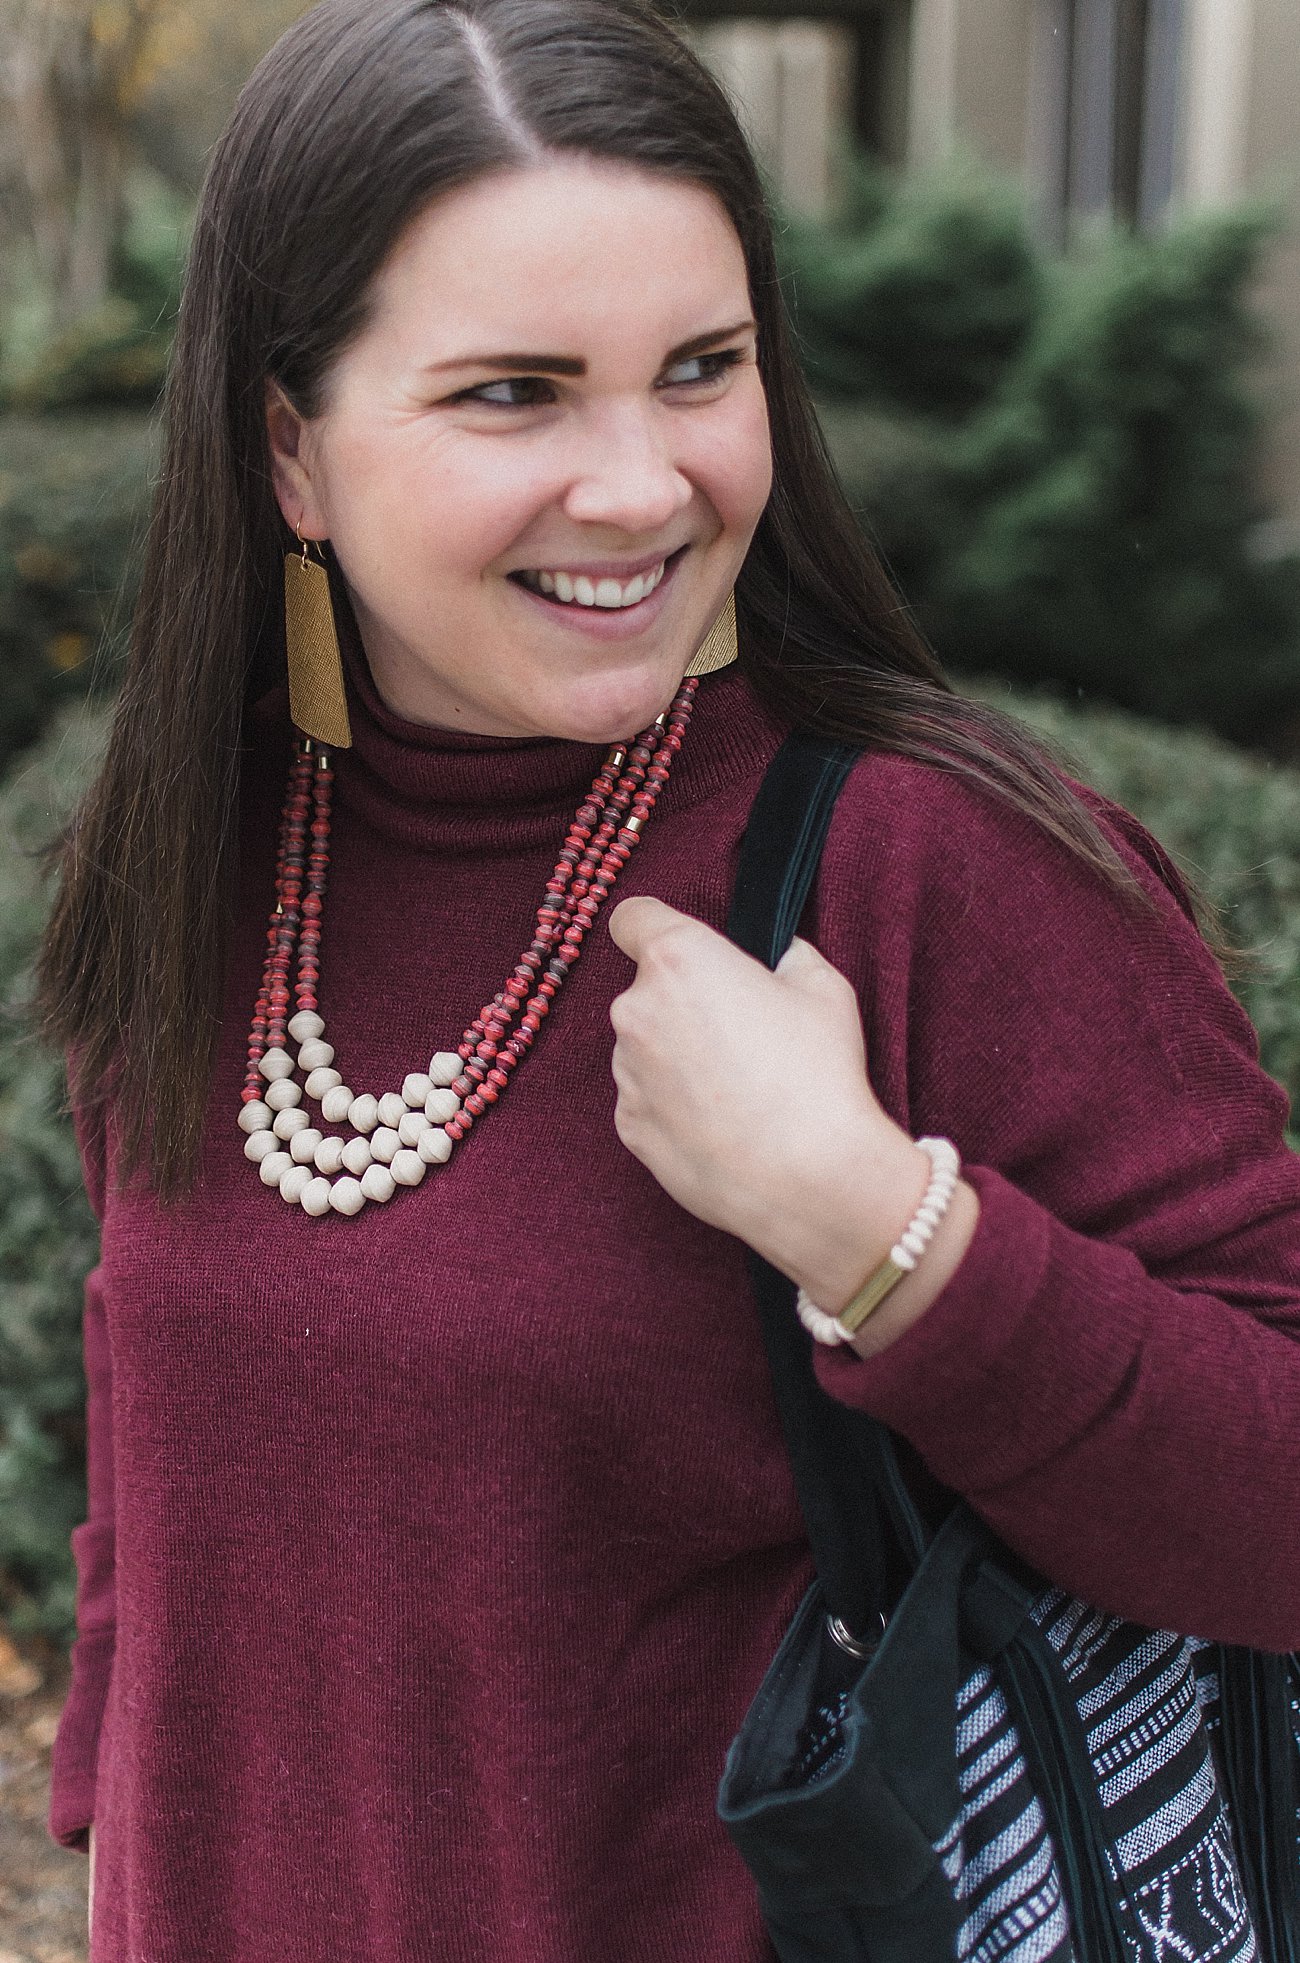 Ethical and Fair Trade Fashion - Hope Made in the World Alpaca Sweater, Dojo flare jeans, Rapha House bag, Milk and Honey market jewelry - fall fashion (7) - The Classic Fall Sweater Made to Last by North Carolina ethical style blogger Still Being Molly